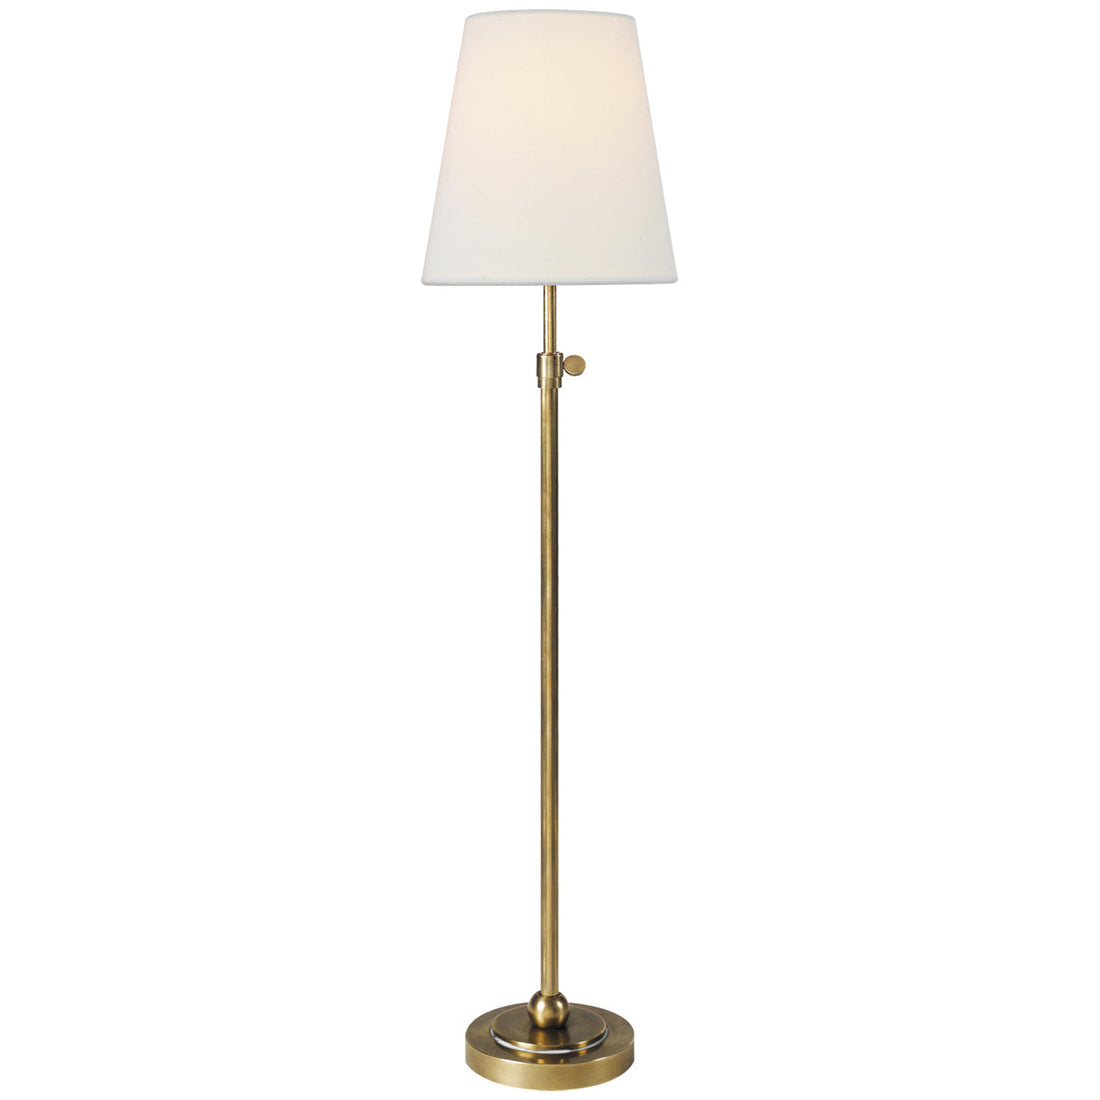 Visual Comfort Bryant Table Lamp with Linen Shade